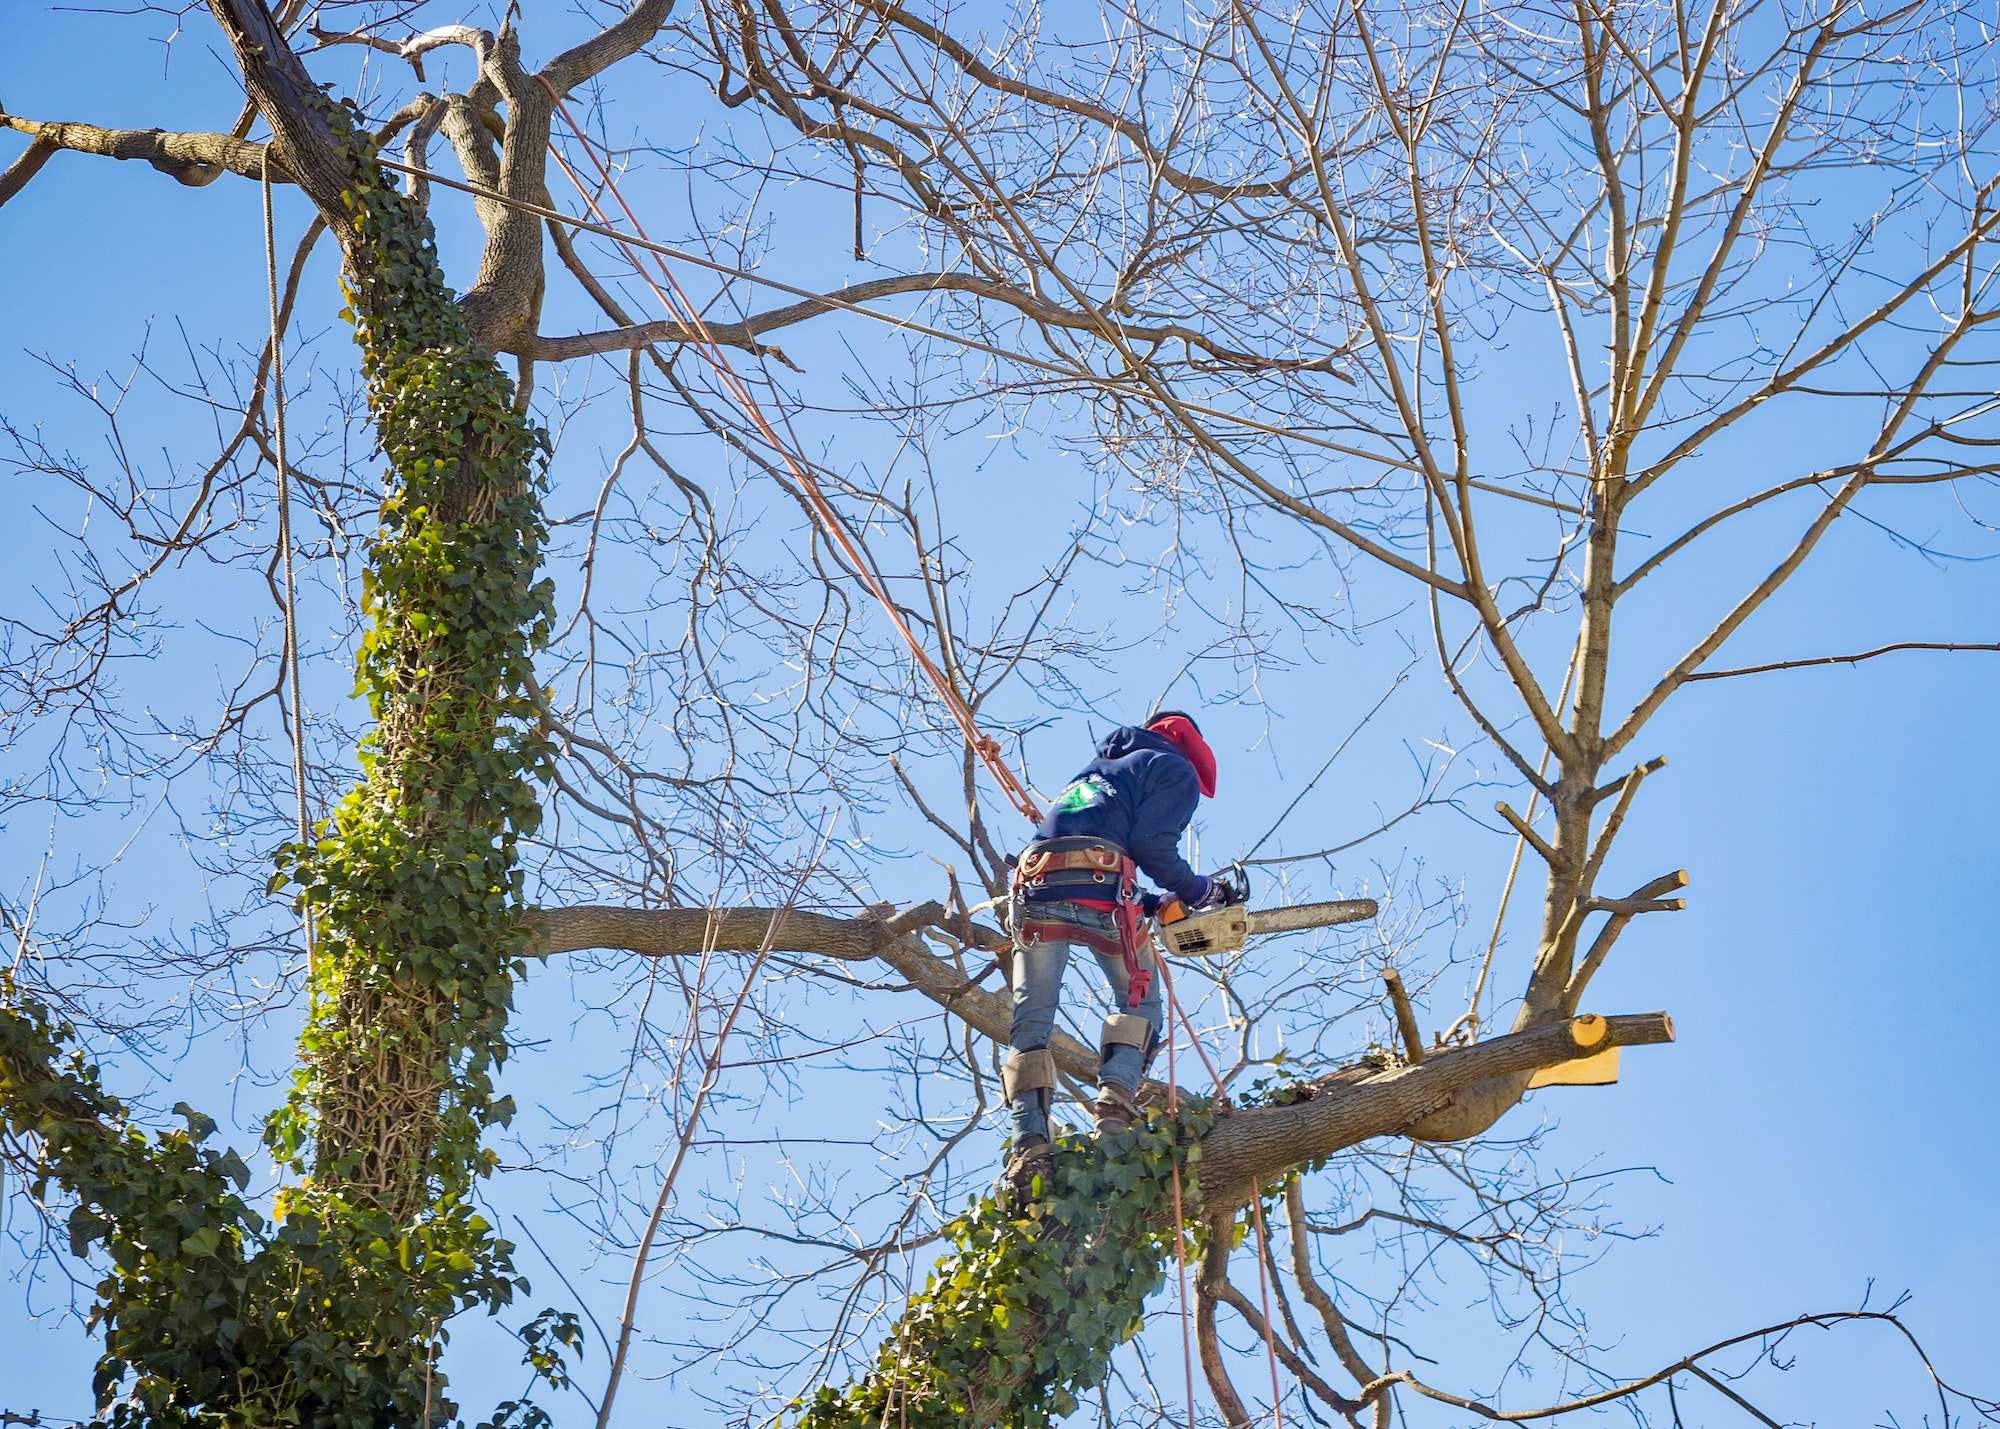 Tree service worker arborist pruning large branches and cutting down large maple tree with chainsaw